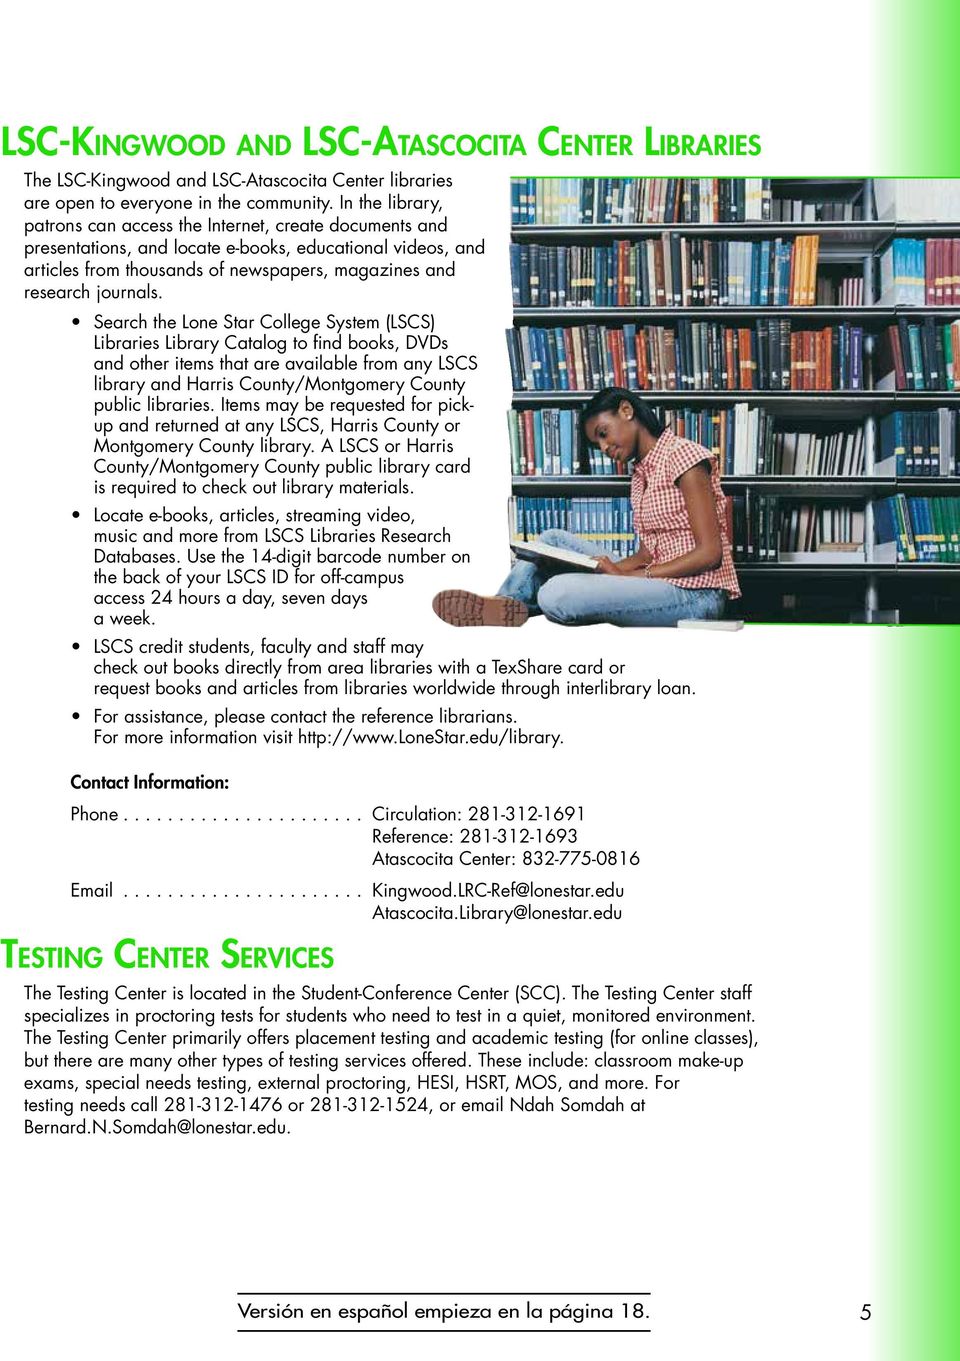 Search the Lone Star College System (LSCS) Libraries Library Catalog to find books, DVDs and other items that are available from any LSCS library and Harris County/Montgomery County public libraries.